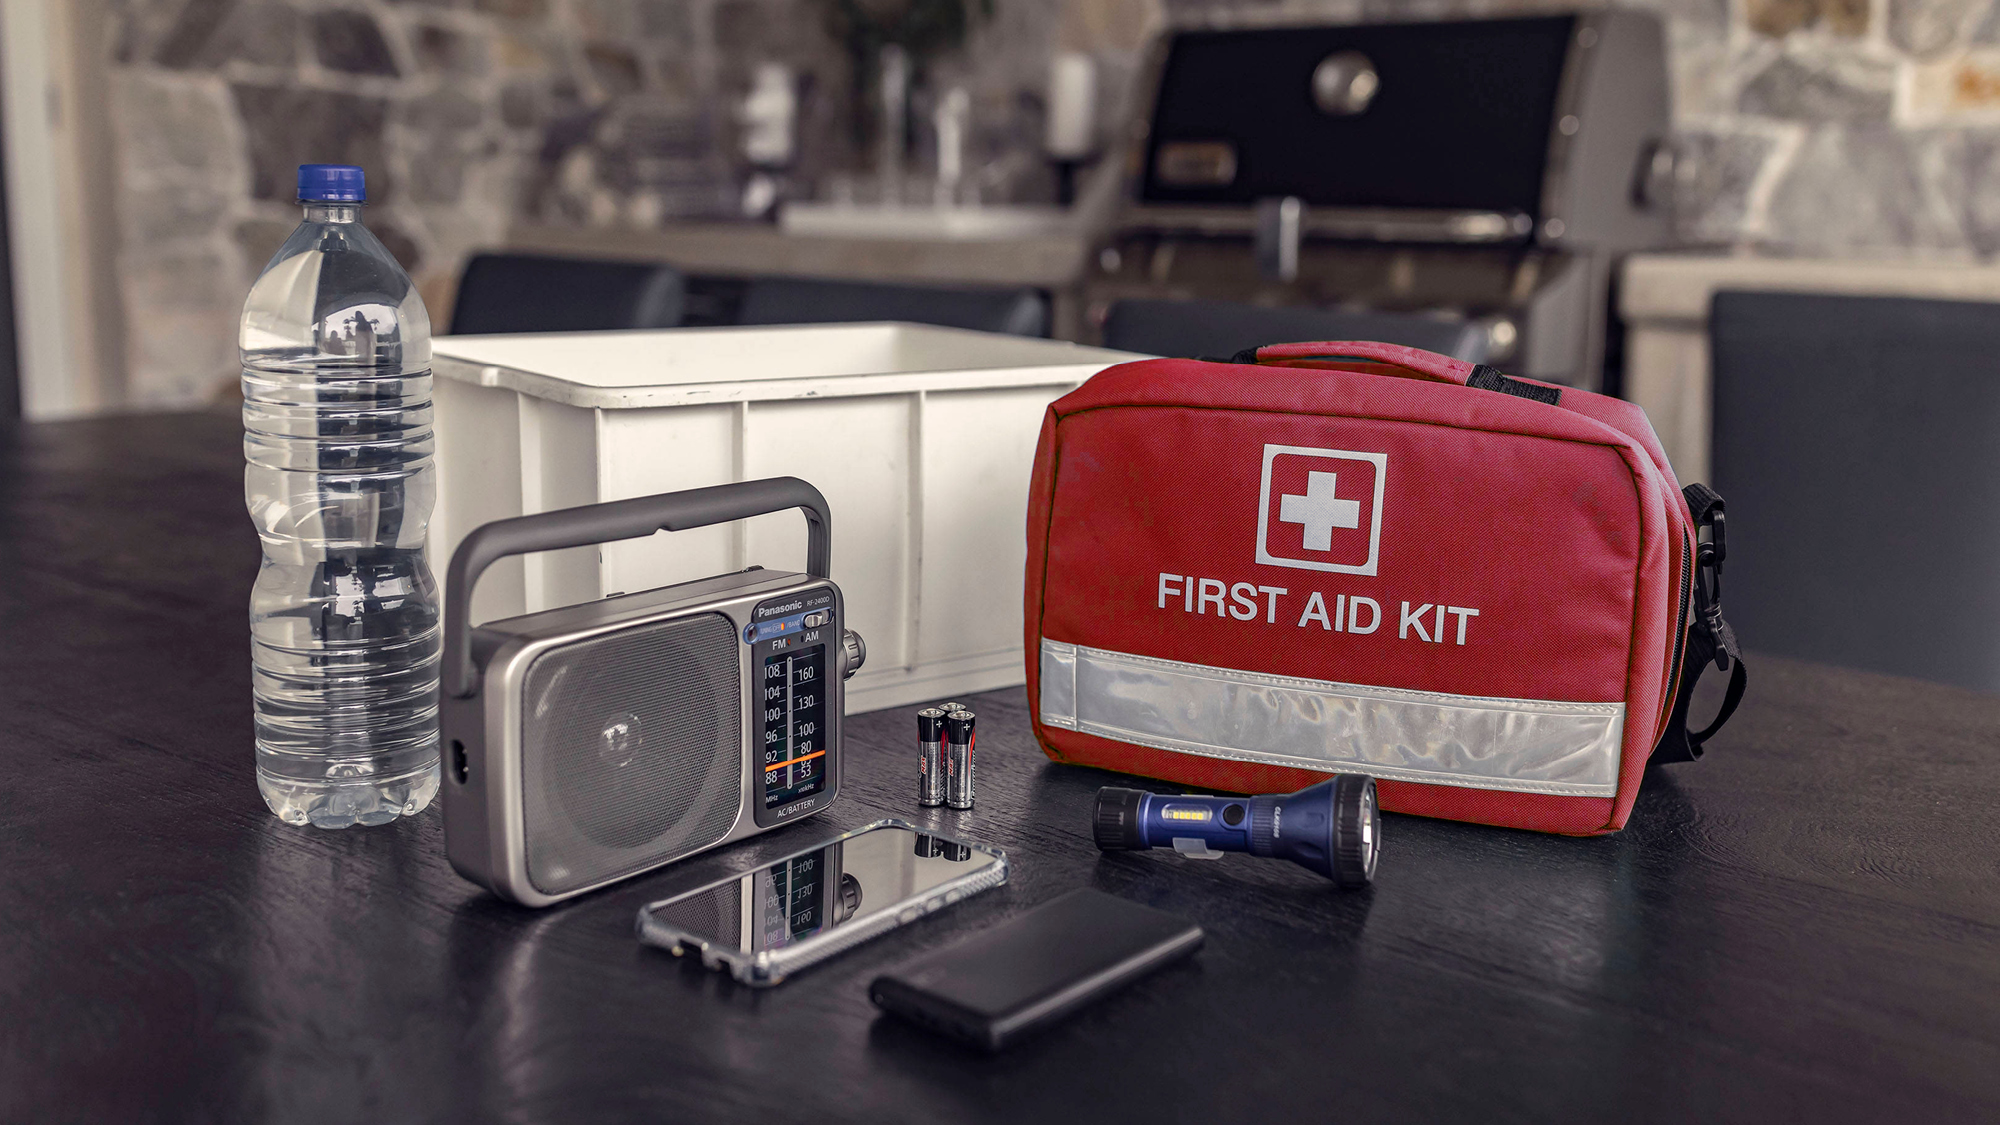 Storm kit of water, radio, phones, torch and first aid kit